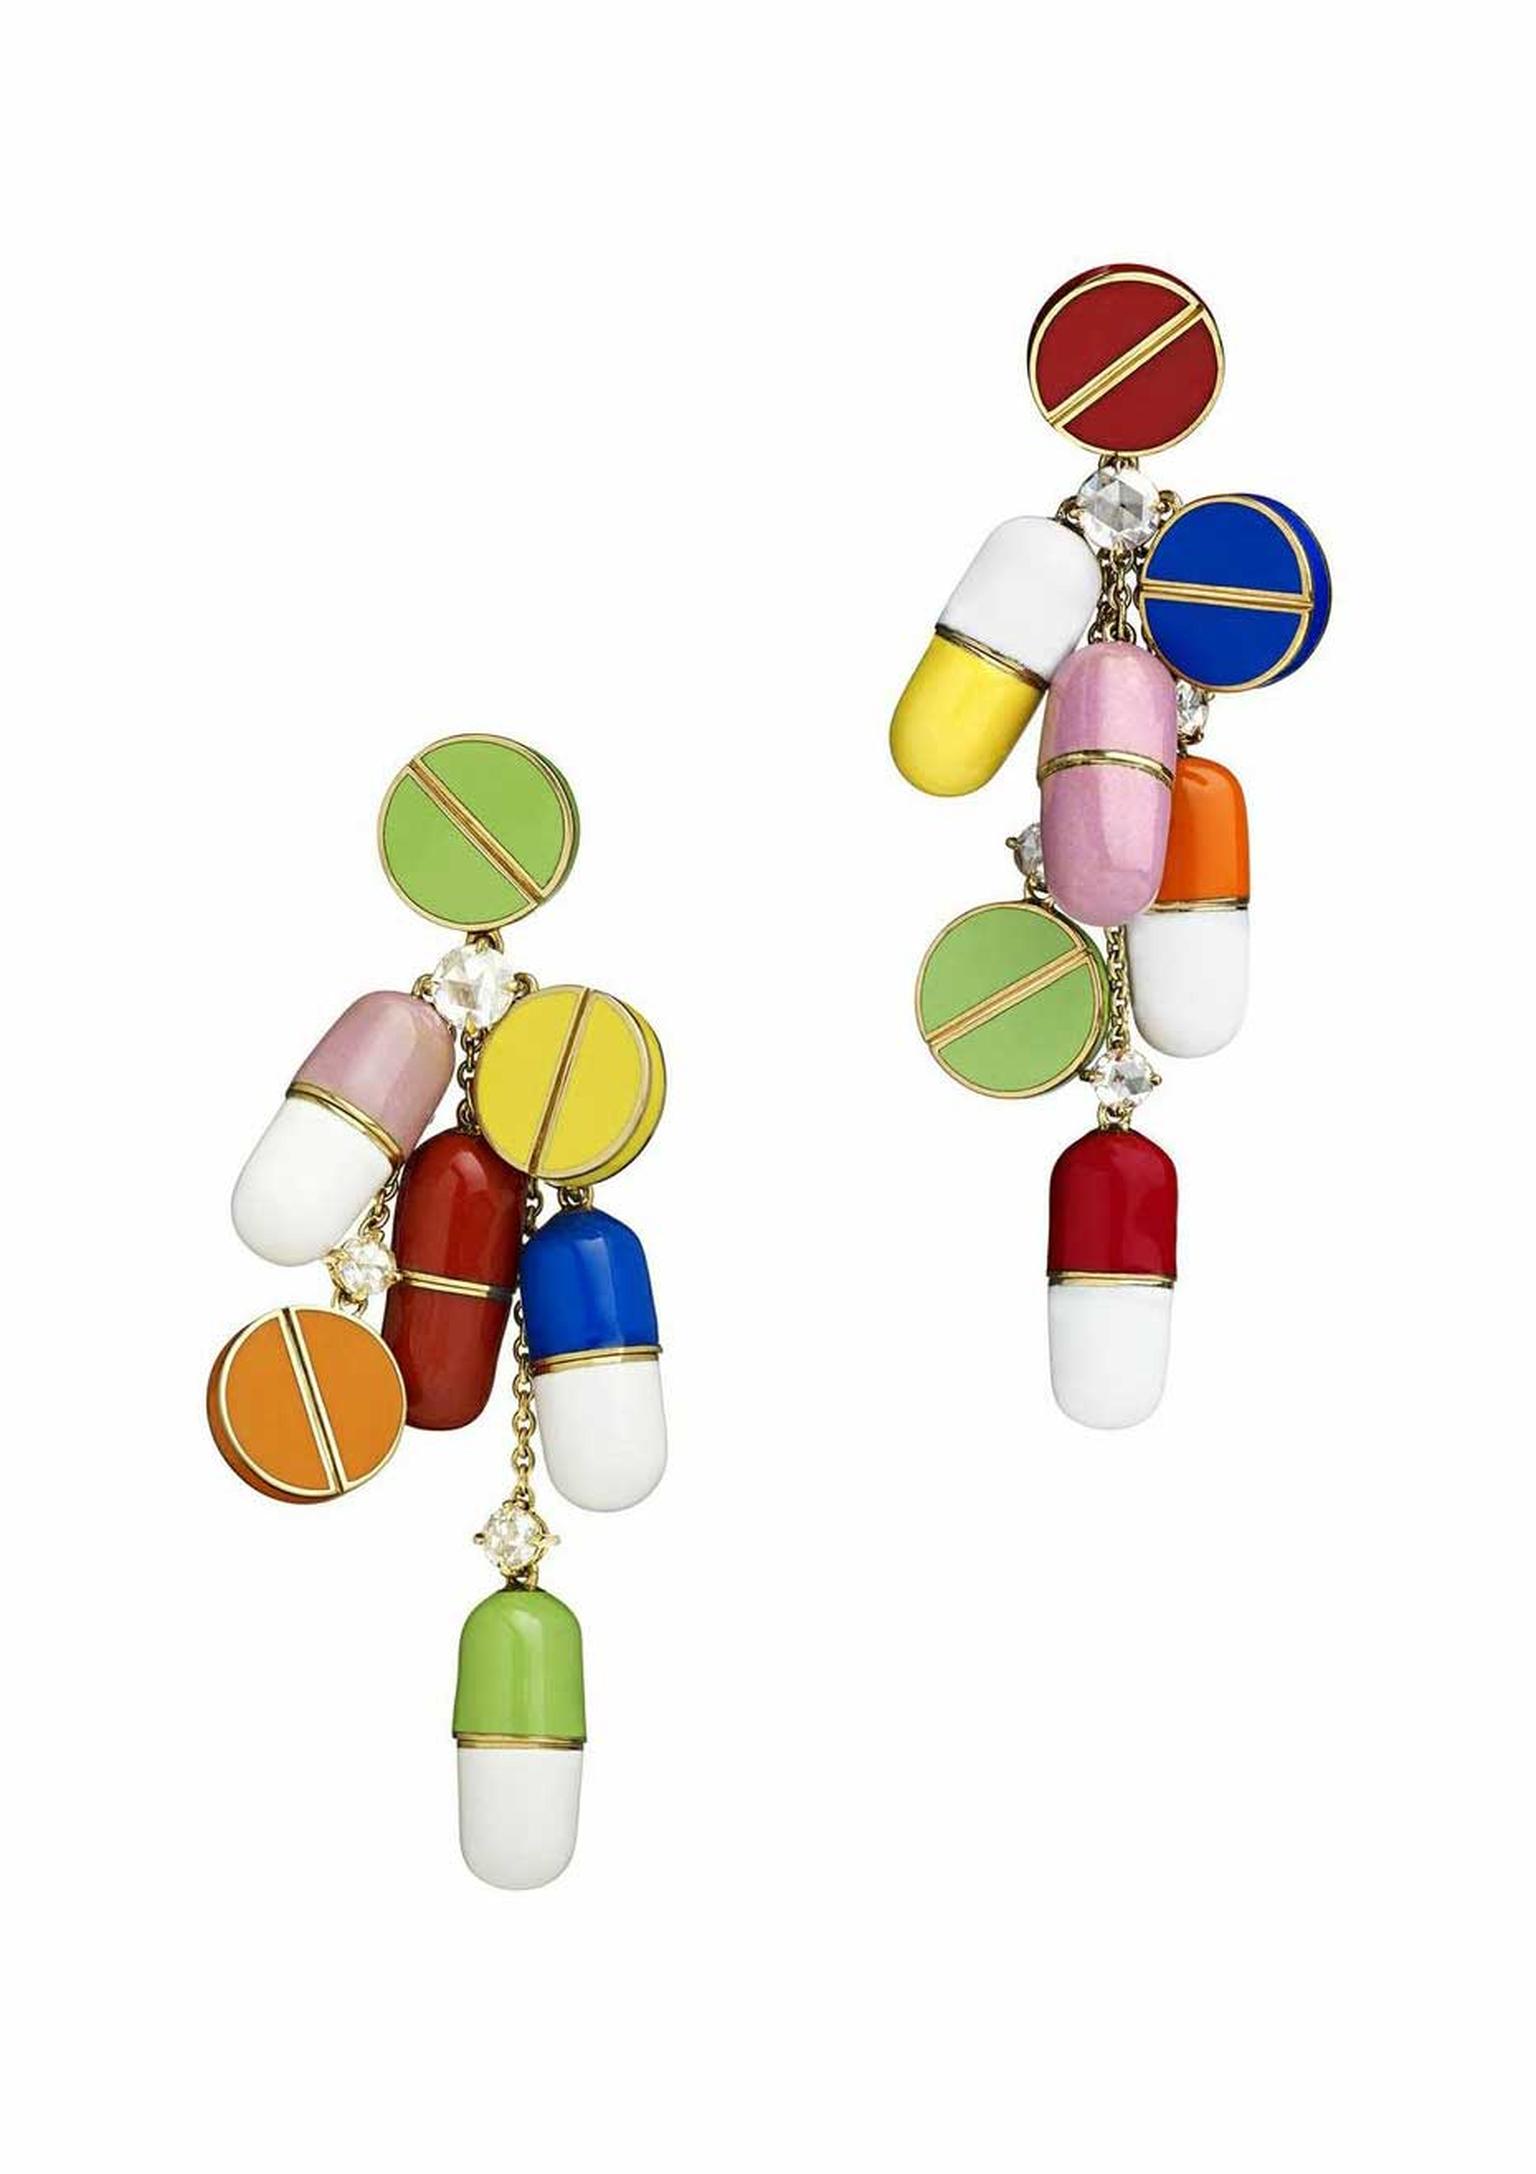 Suzanne Syz’s ‘Take it or leave it’ earrings featuring enamel and diamonds.